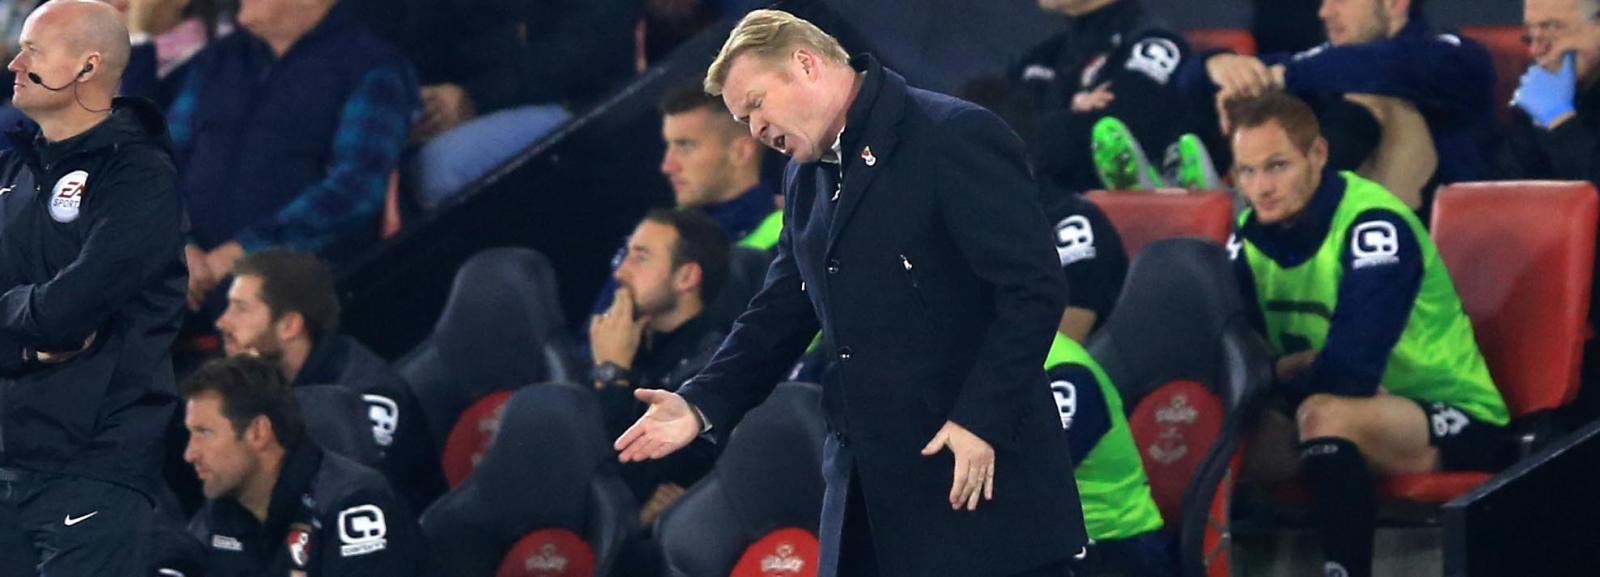 Everton appoint Ronald Koeman as their new manager on a three-year deal